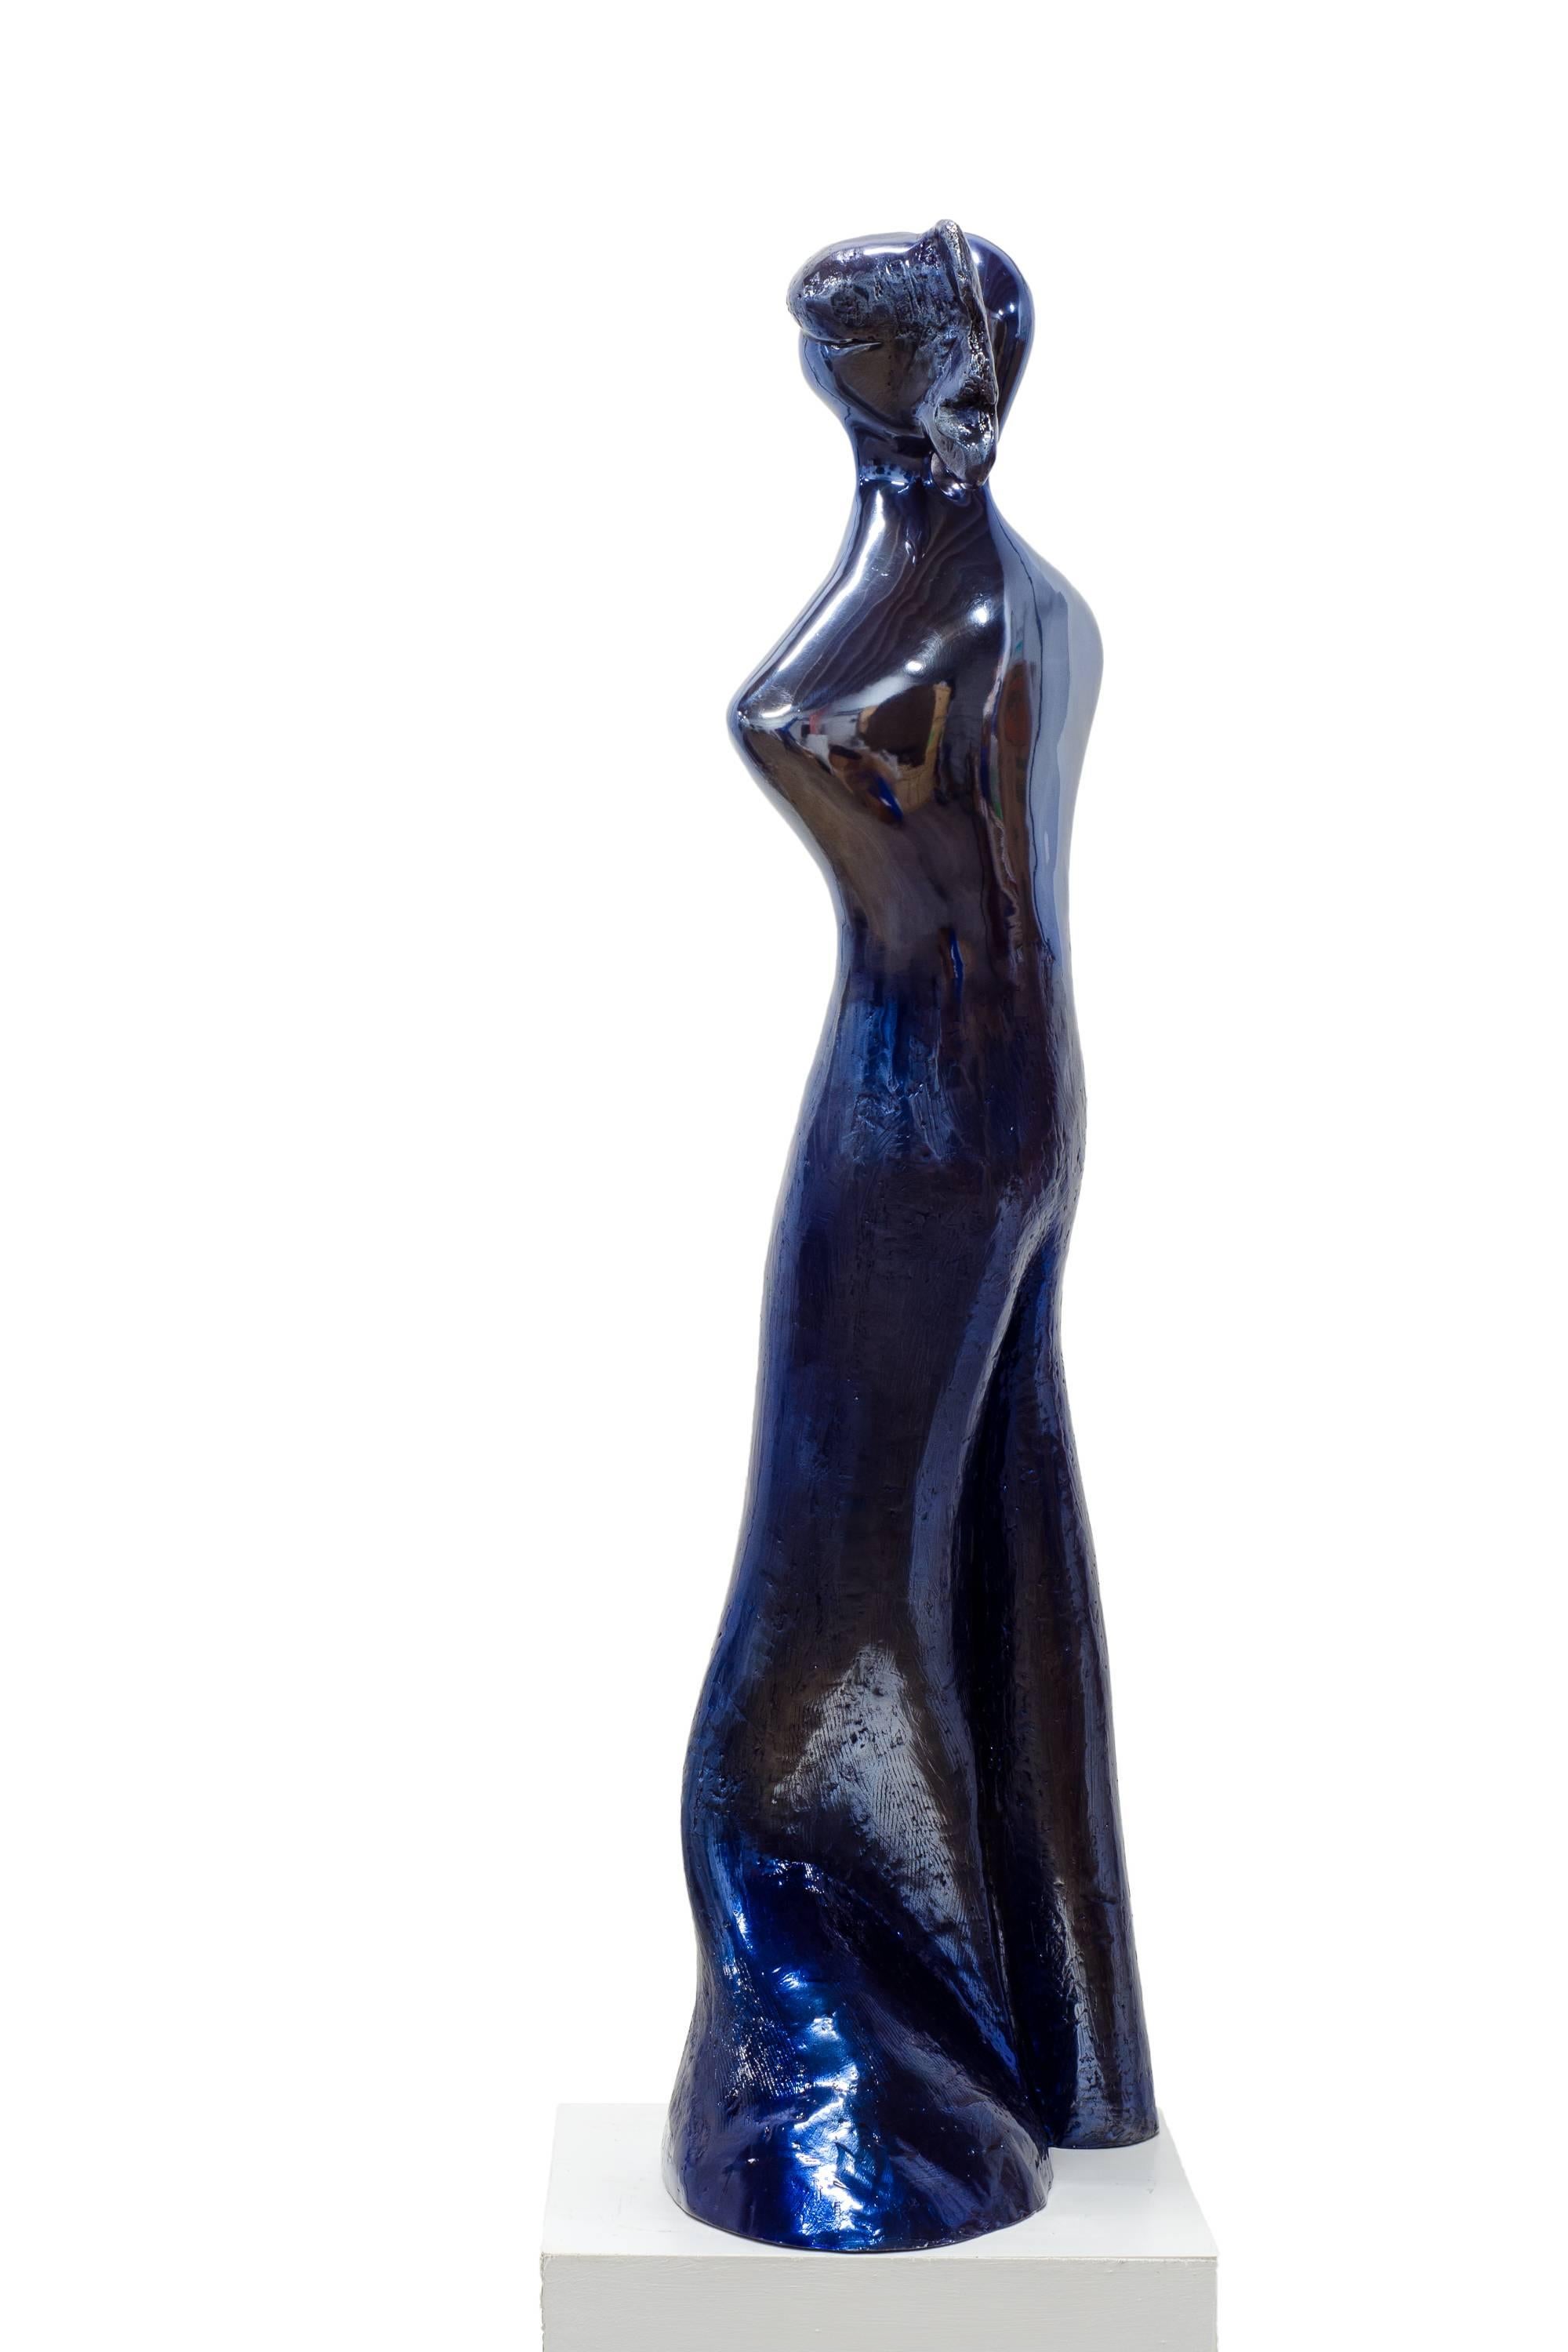 Soulmates #1 (in Blue). When In love, their souls and bodies fuse into just one. - Gold Figurative Sculpture by Beatriz Gerenstein